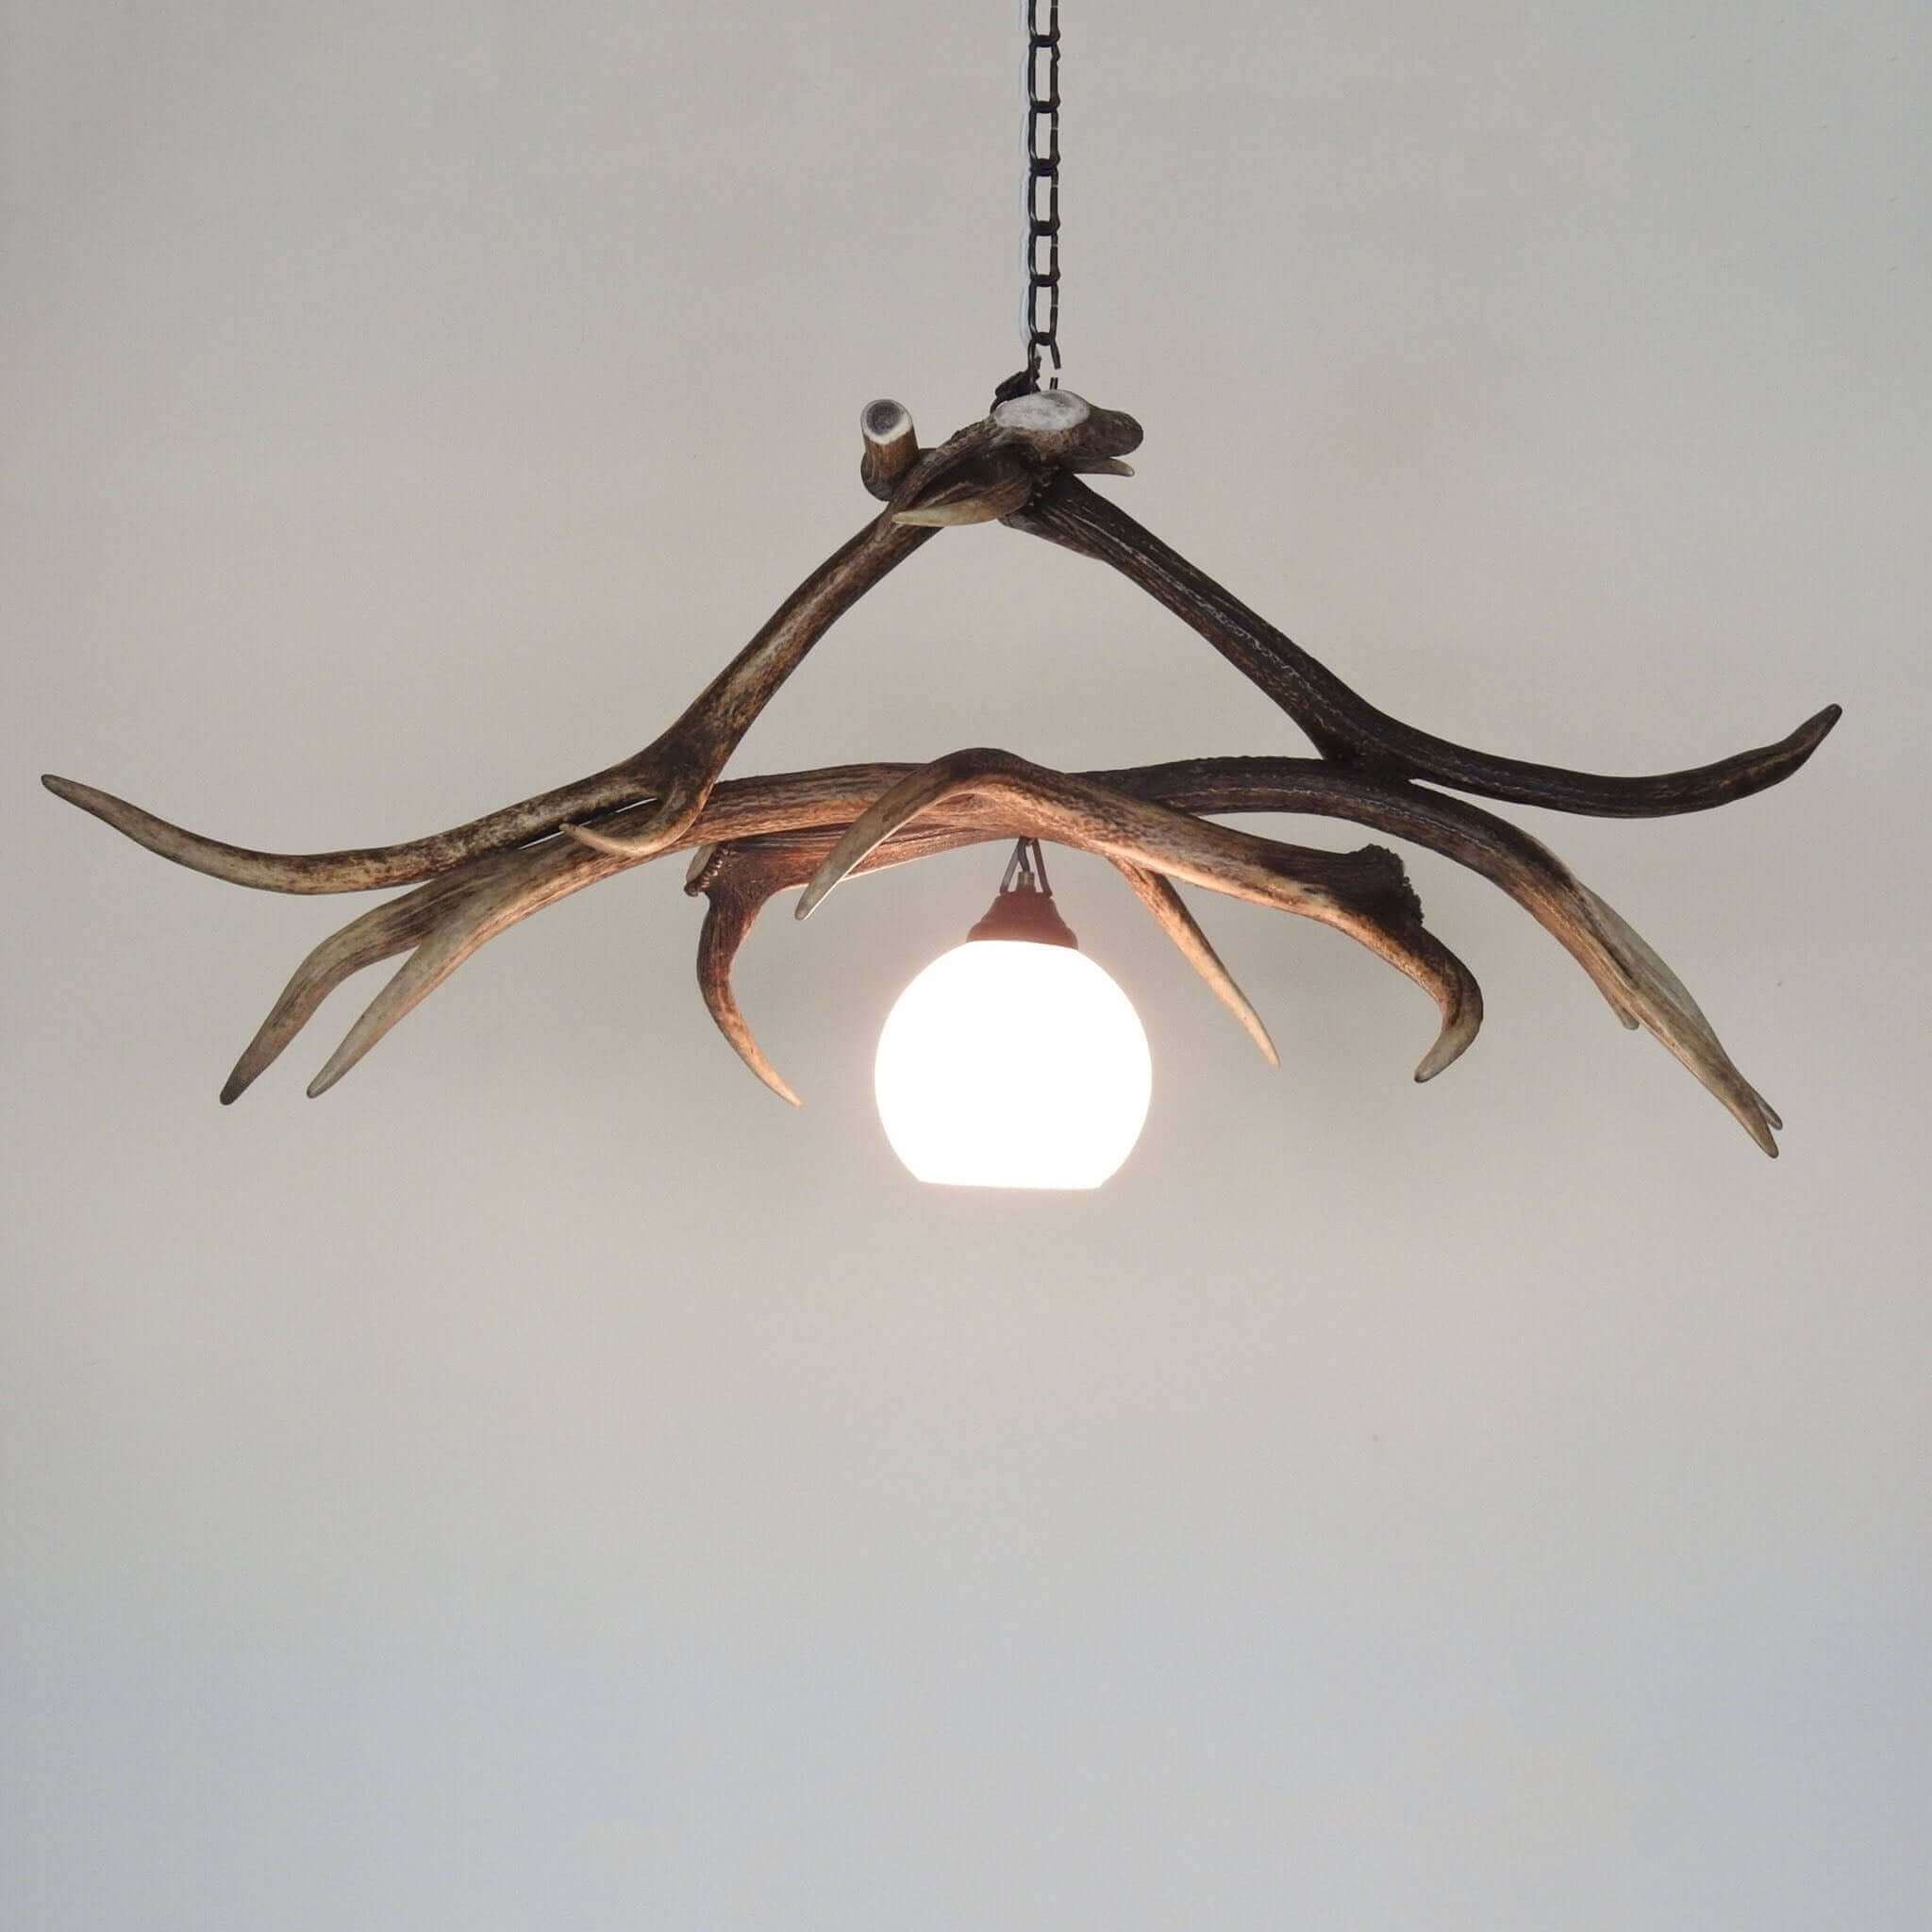 Antler pendant lamp made of real antlers.